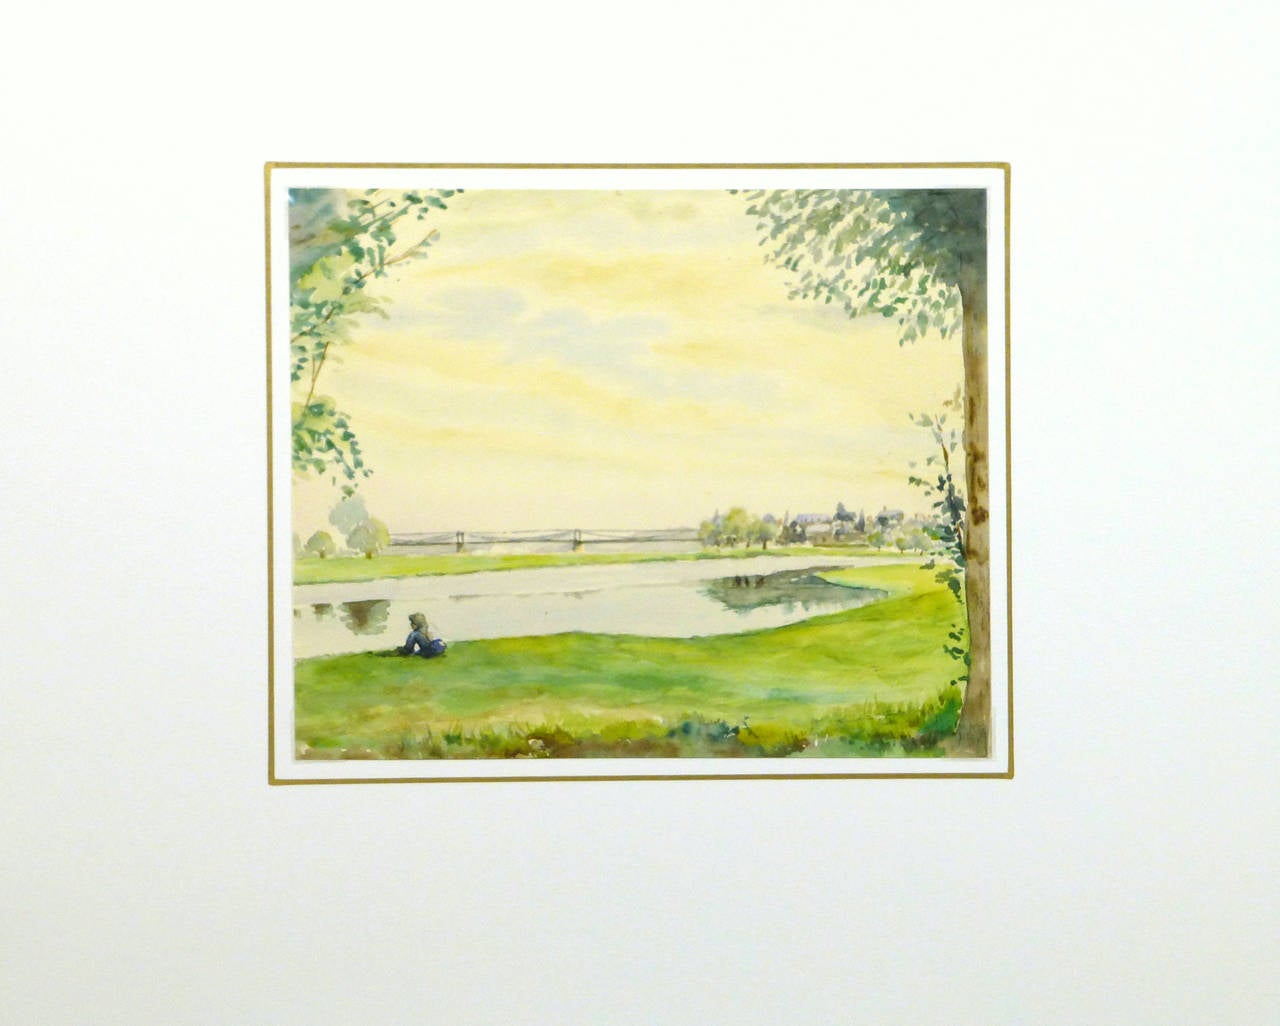 Luminous watercolor depicting a quiet country scene in Normandy, France by C. Groux, circa 1930. The radiant sky, vibrant green pasture, and silver-hued river fill this painting with an otherworldly light, while the kneeling figure in the foreground